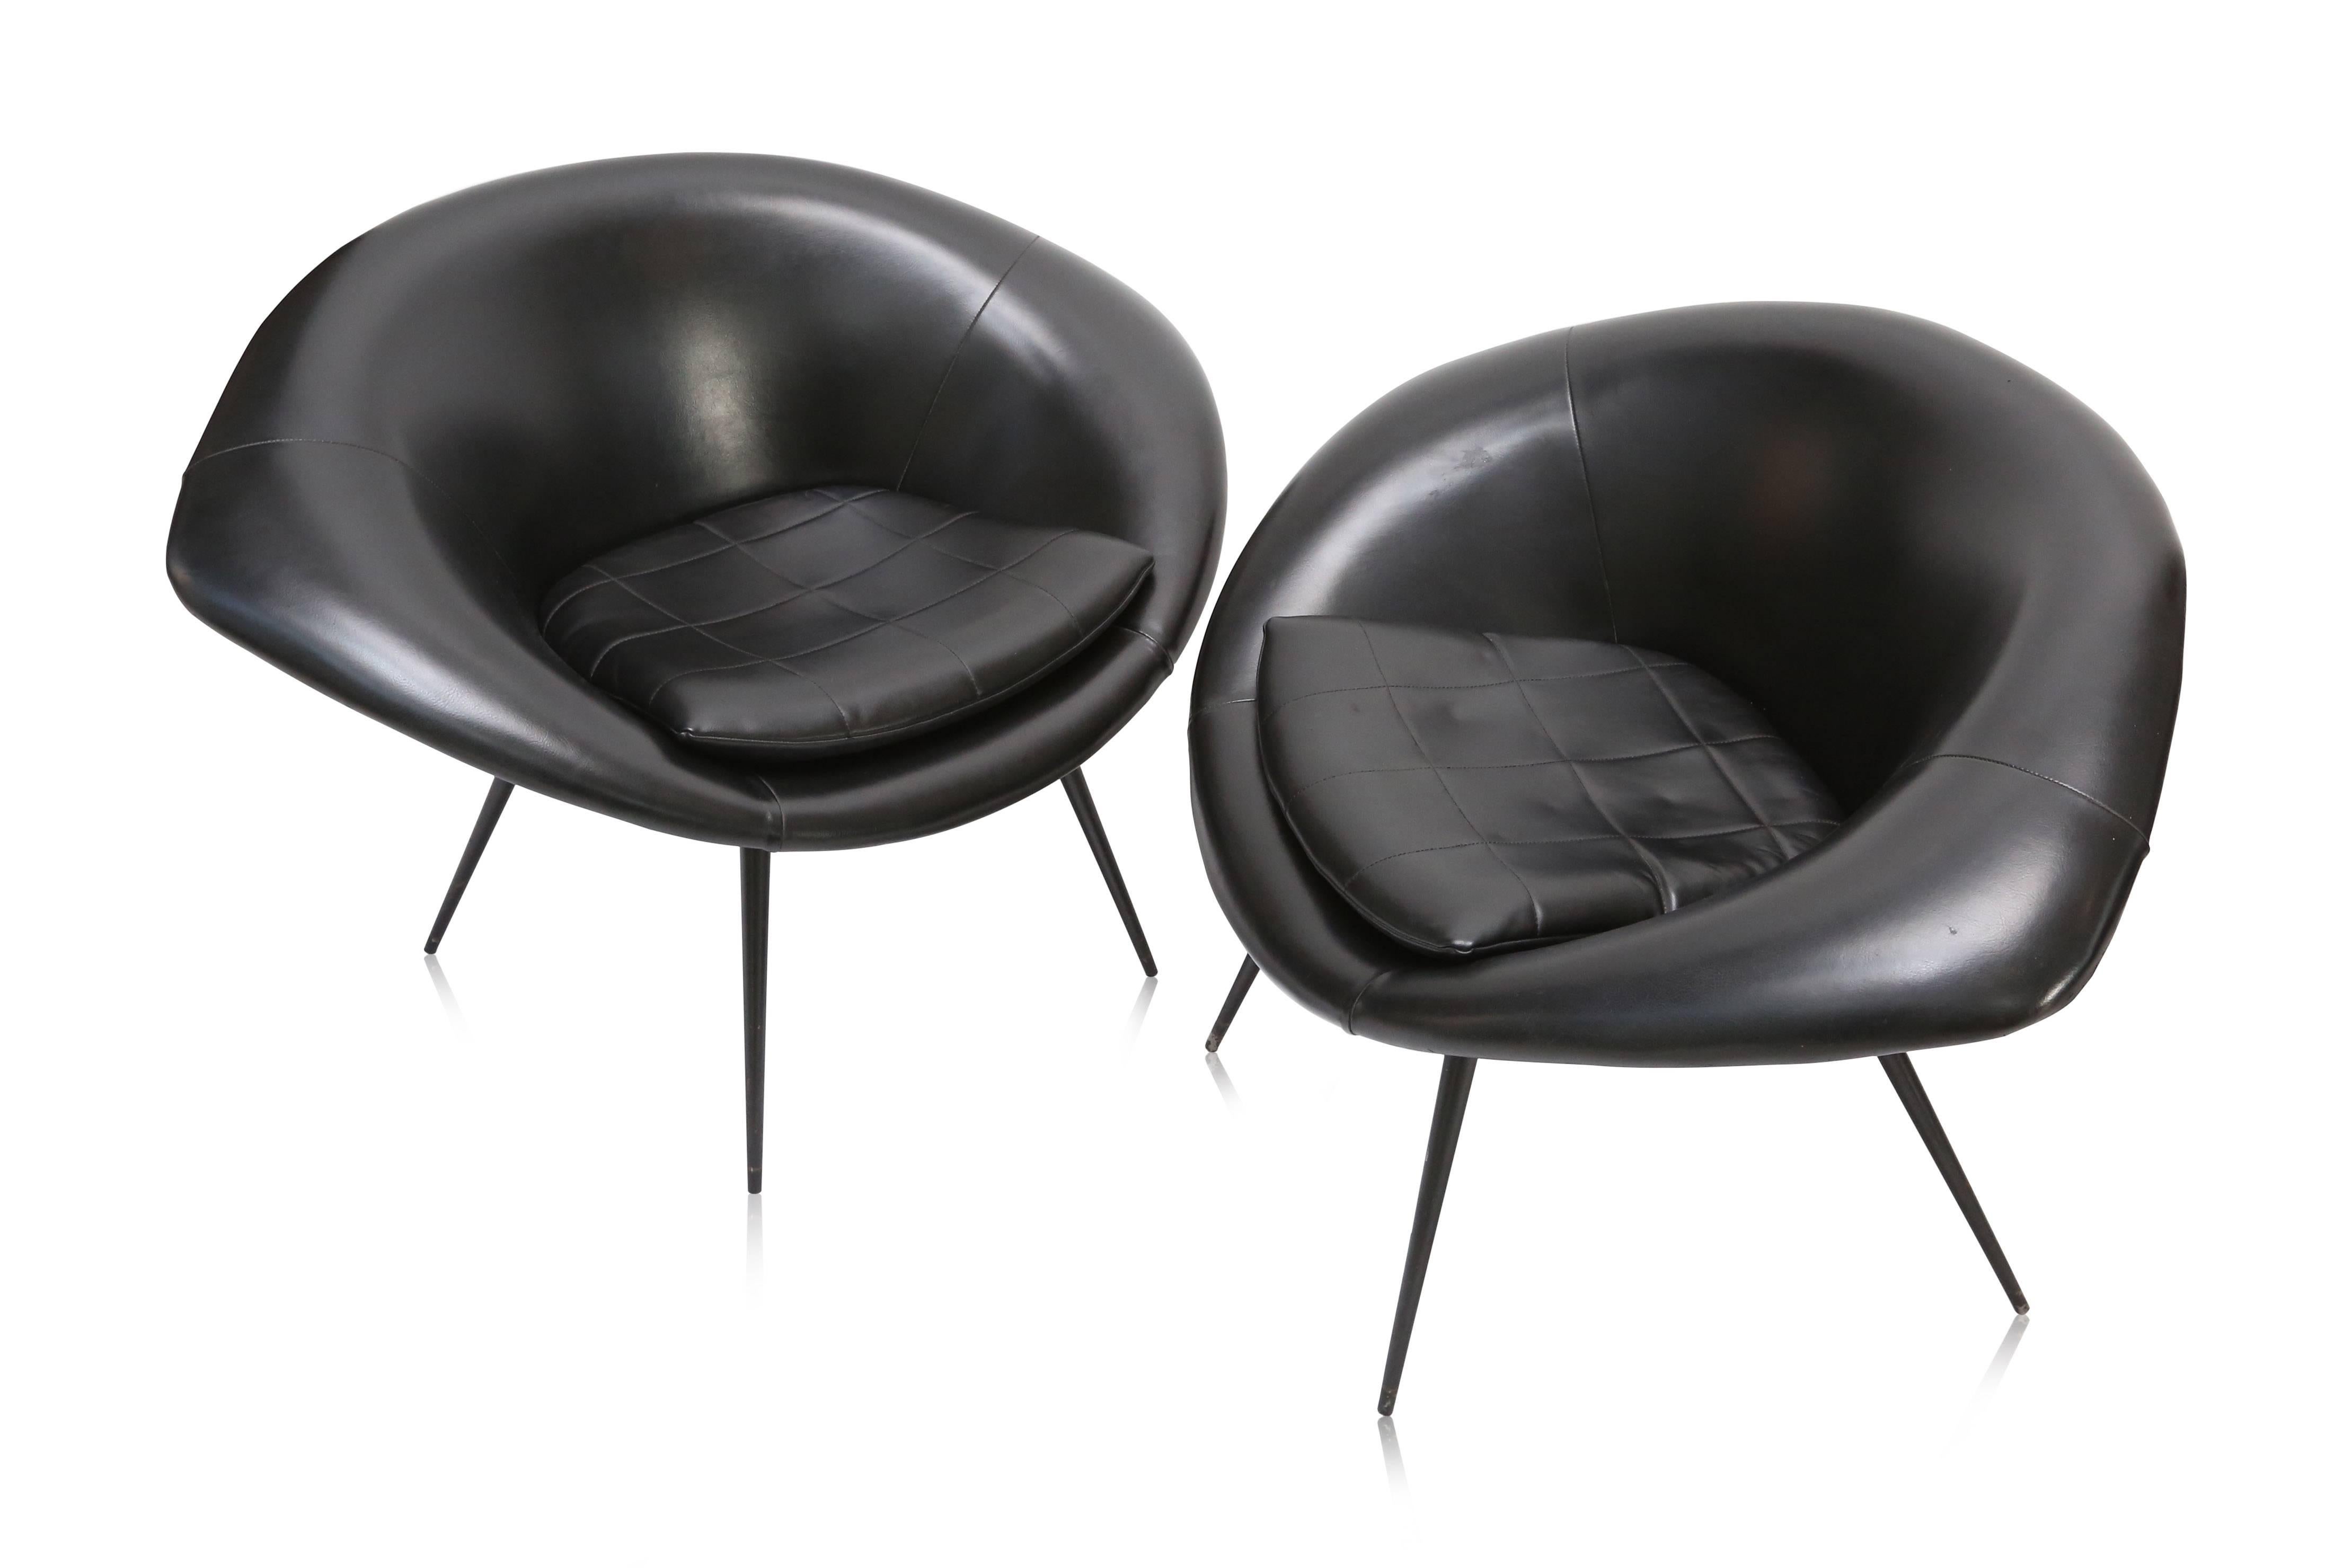 Blackened Mid-century modern vintage Pierre Guariche Space Age Oyster Chairs